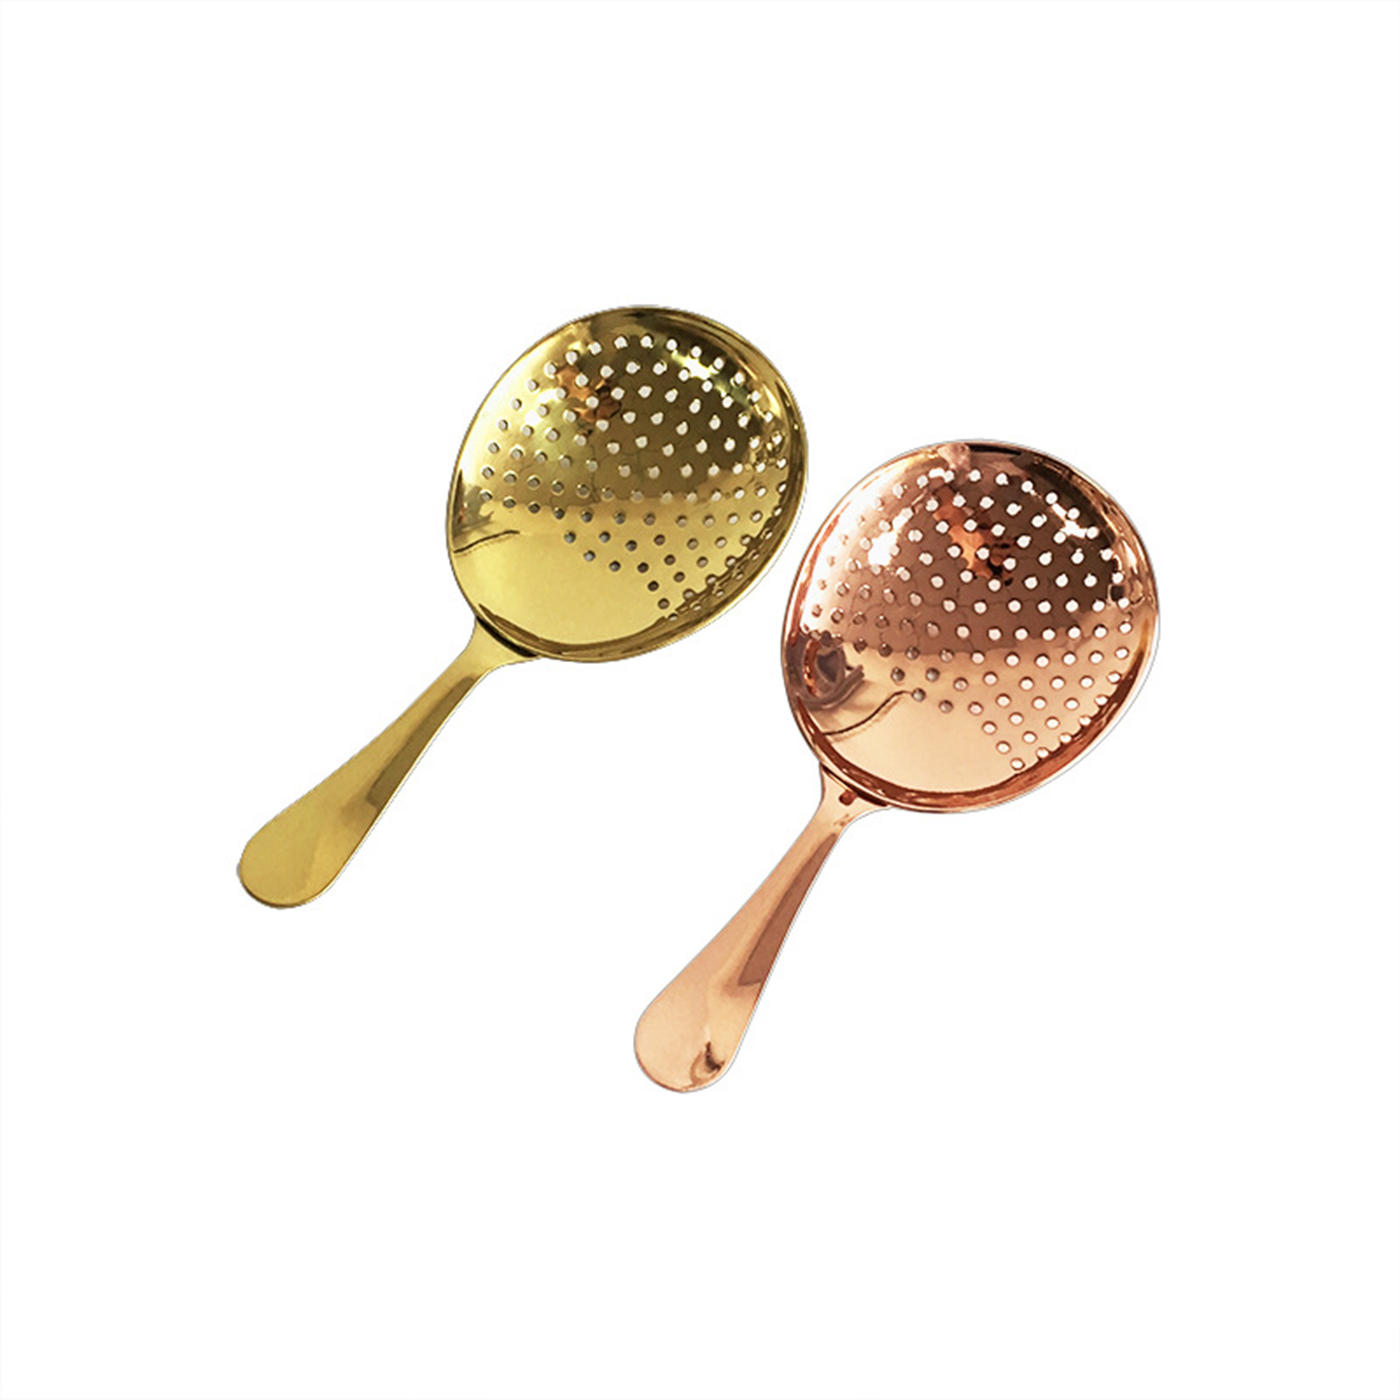 Classic Bar Julep Cocktail Strainer1